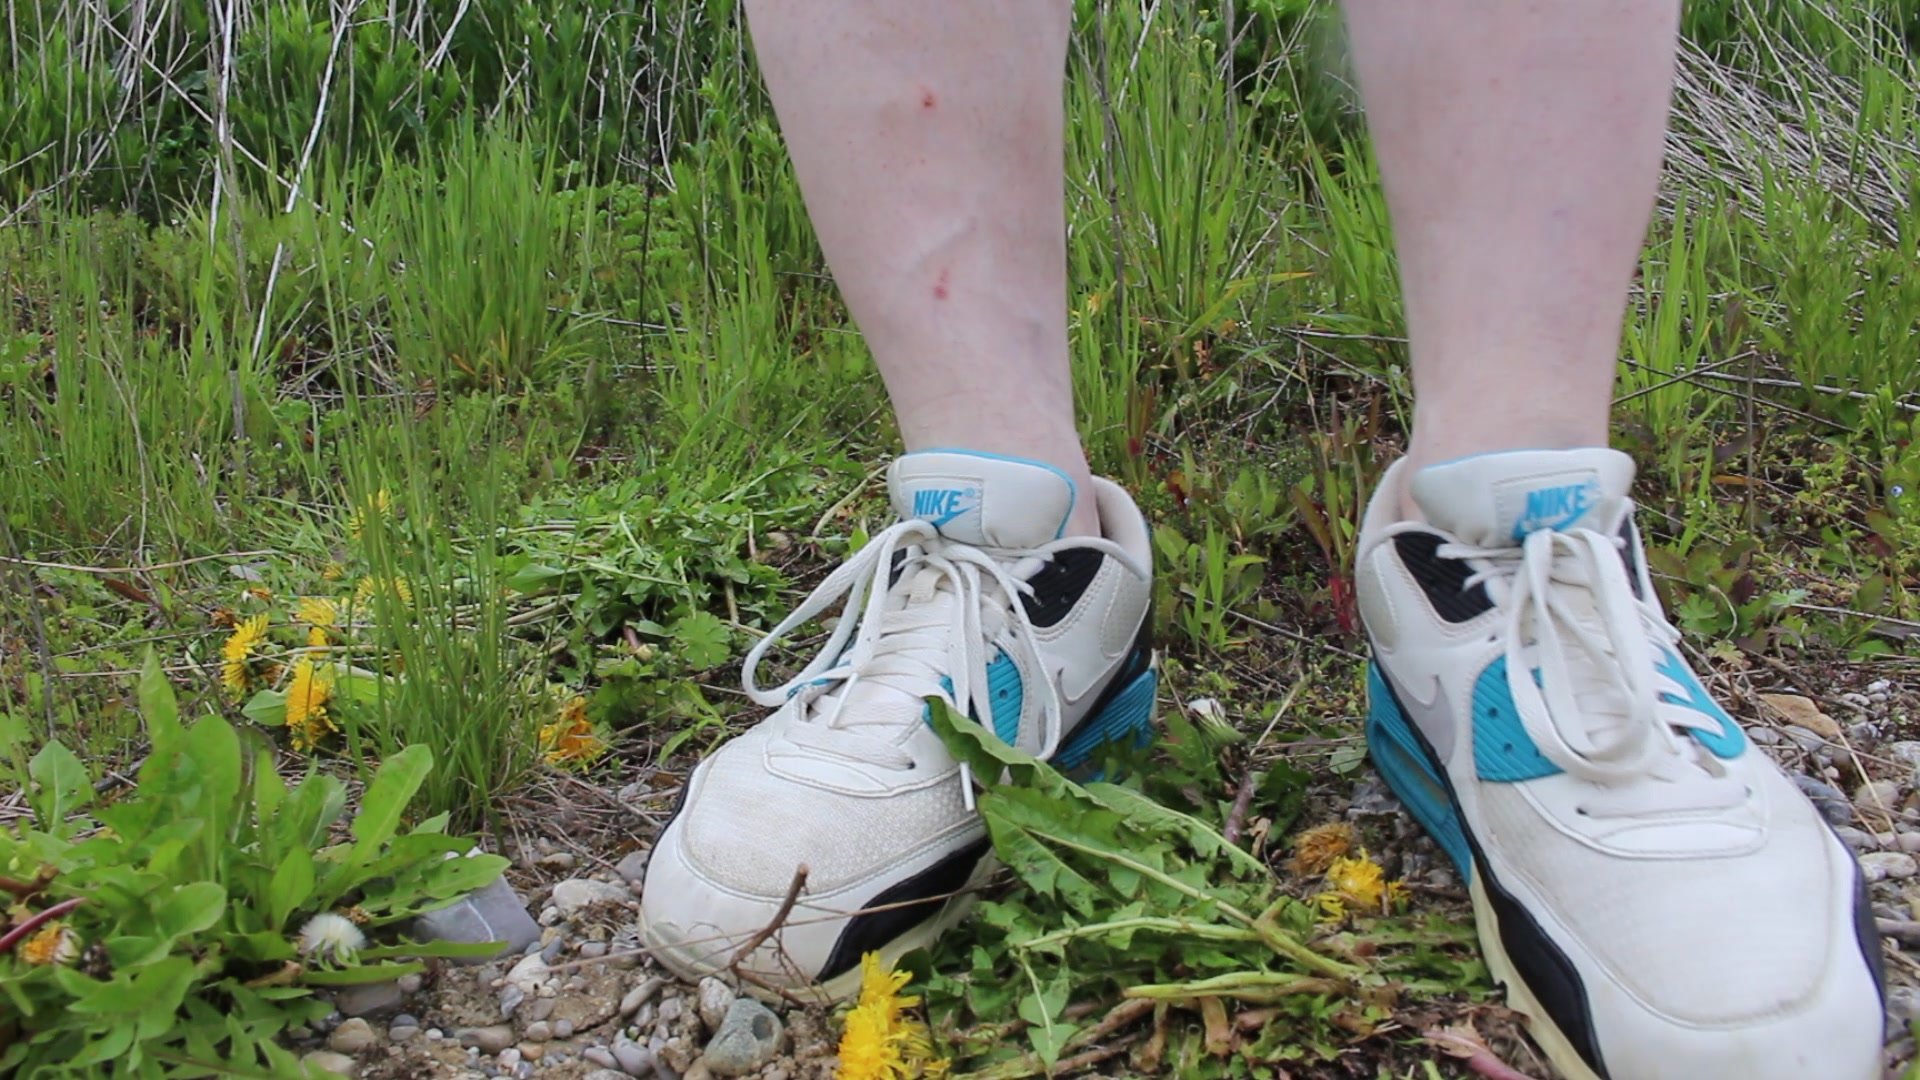 Crush dandelions with Air Max 90.